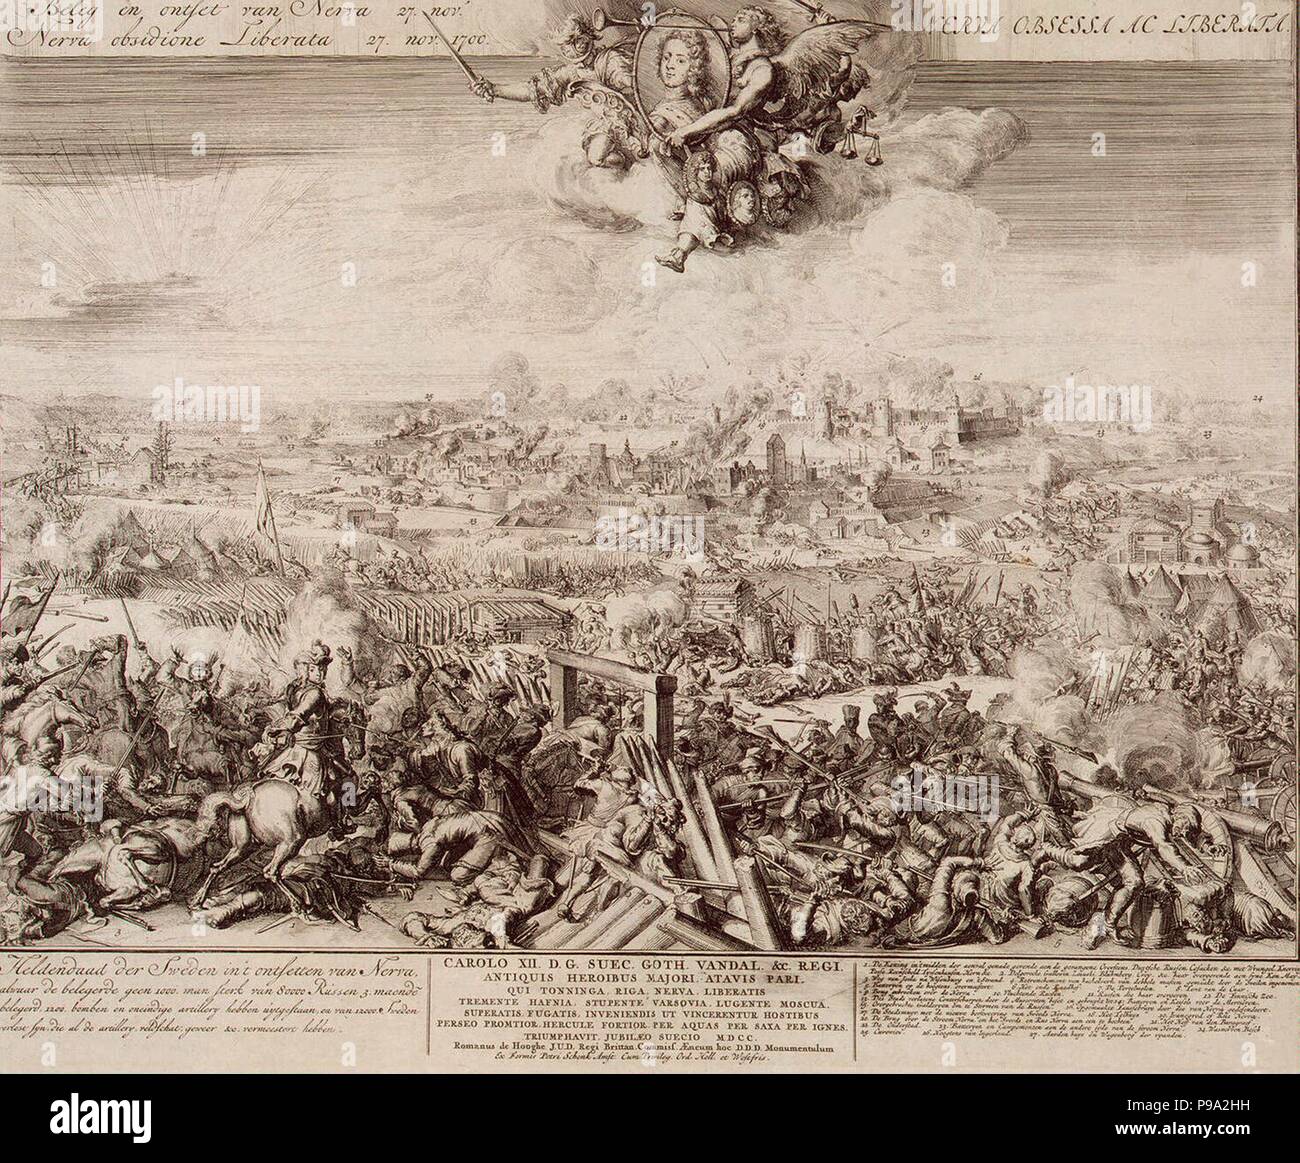 The Battle of Narva on 19 November 1700. Museum: State Hermitage, St. Petersburg. Stock Photo